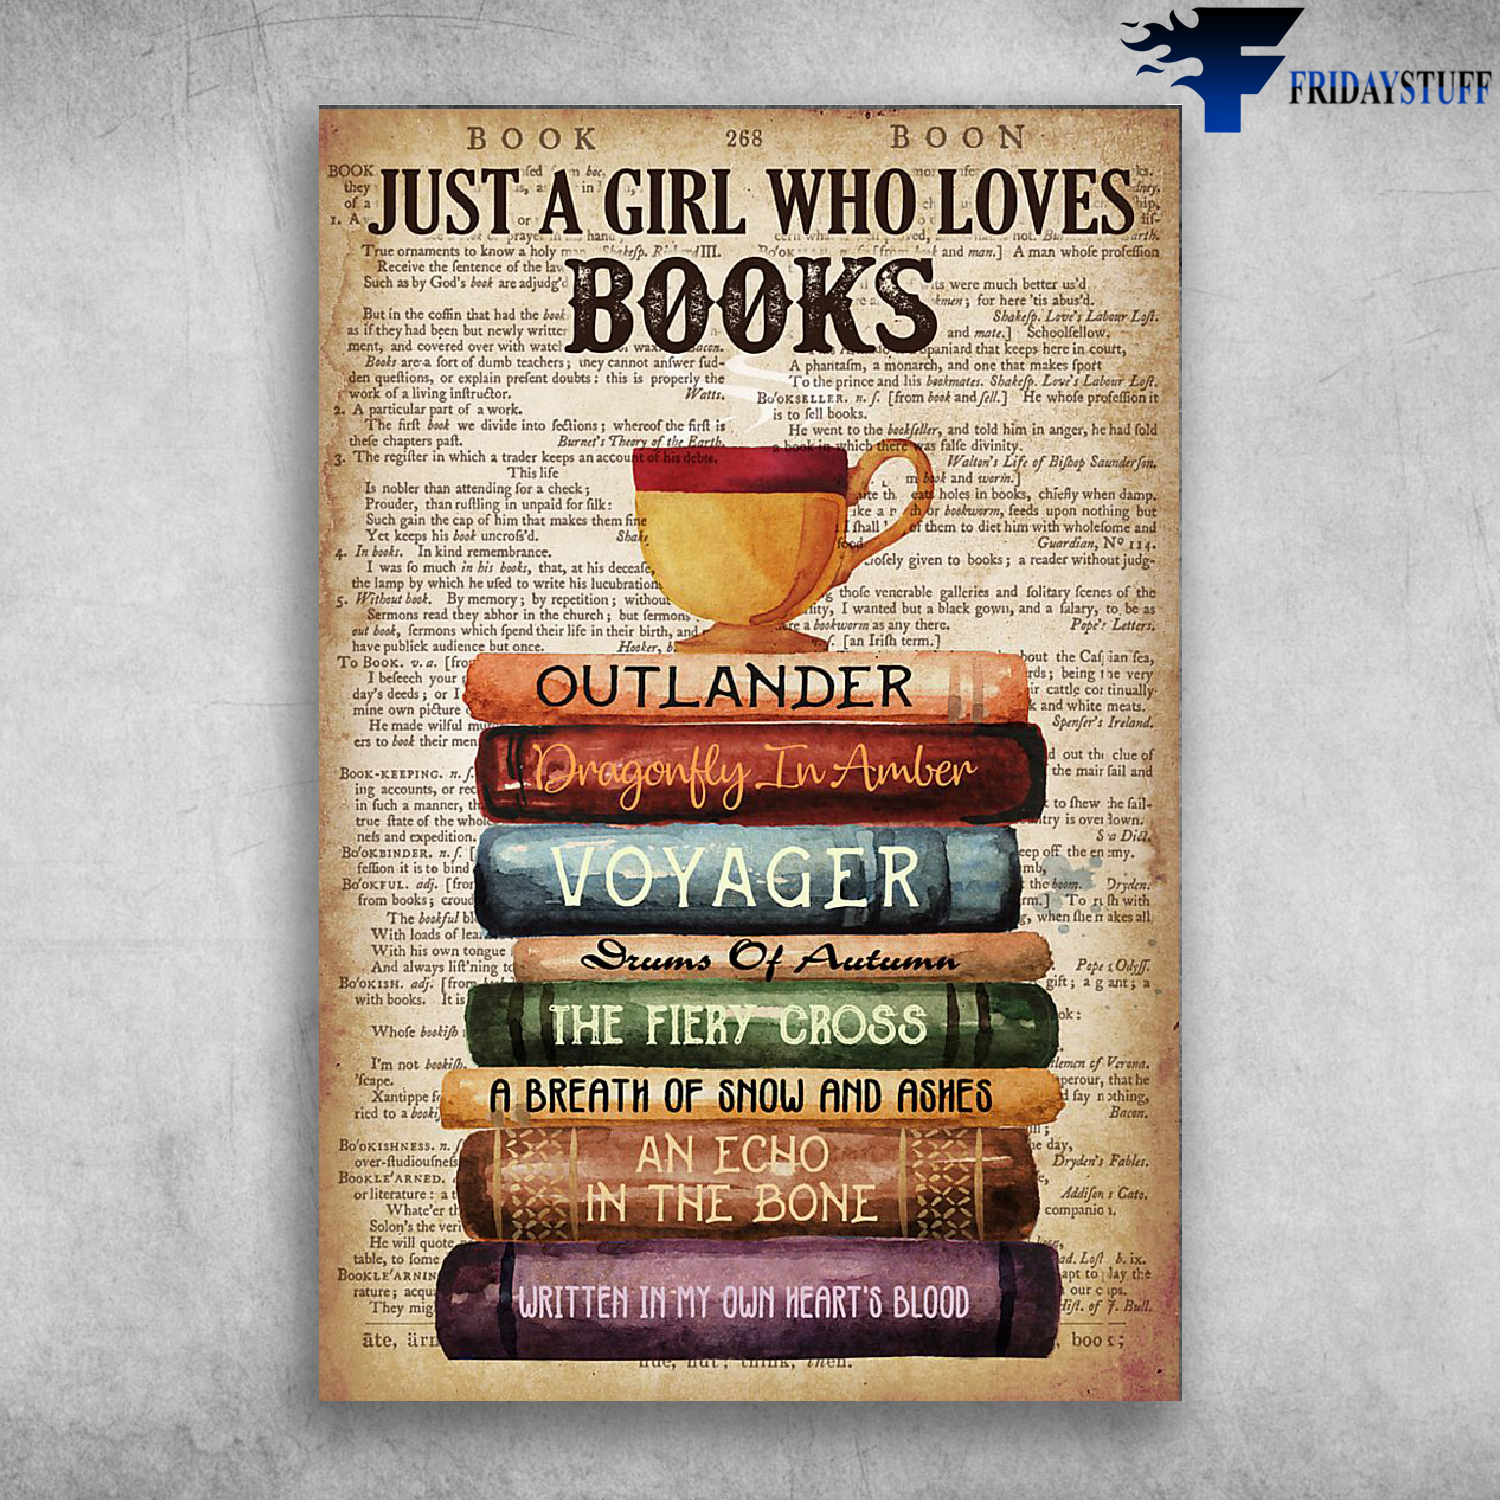 Just A Girl Who Loves Books And Coffee - Outlander Dragonfly In Amber Vovager